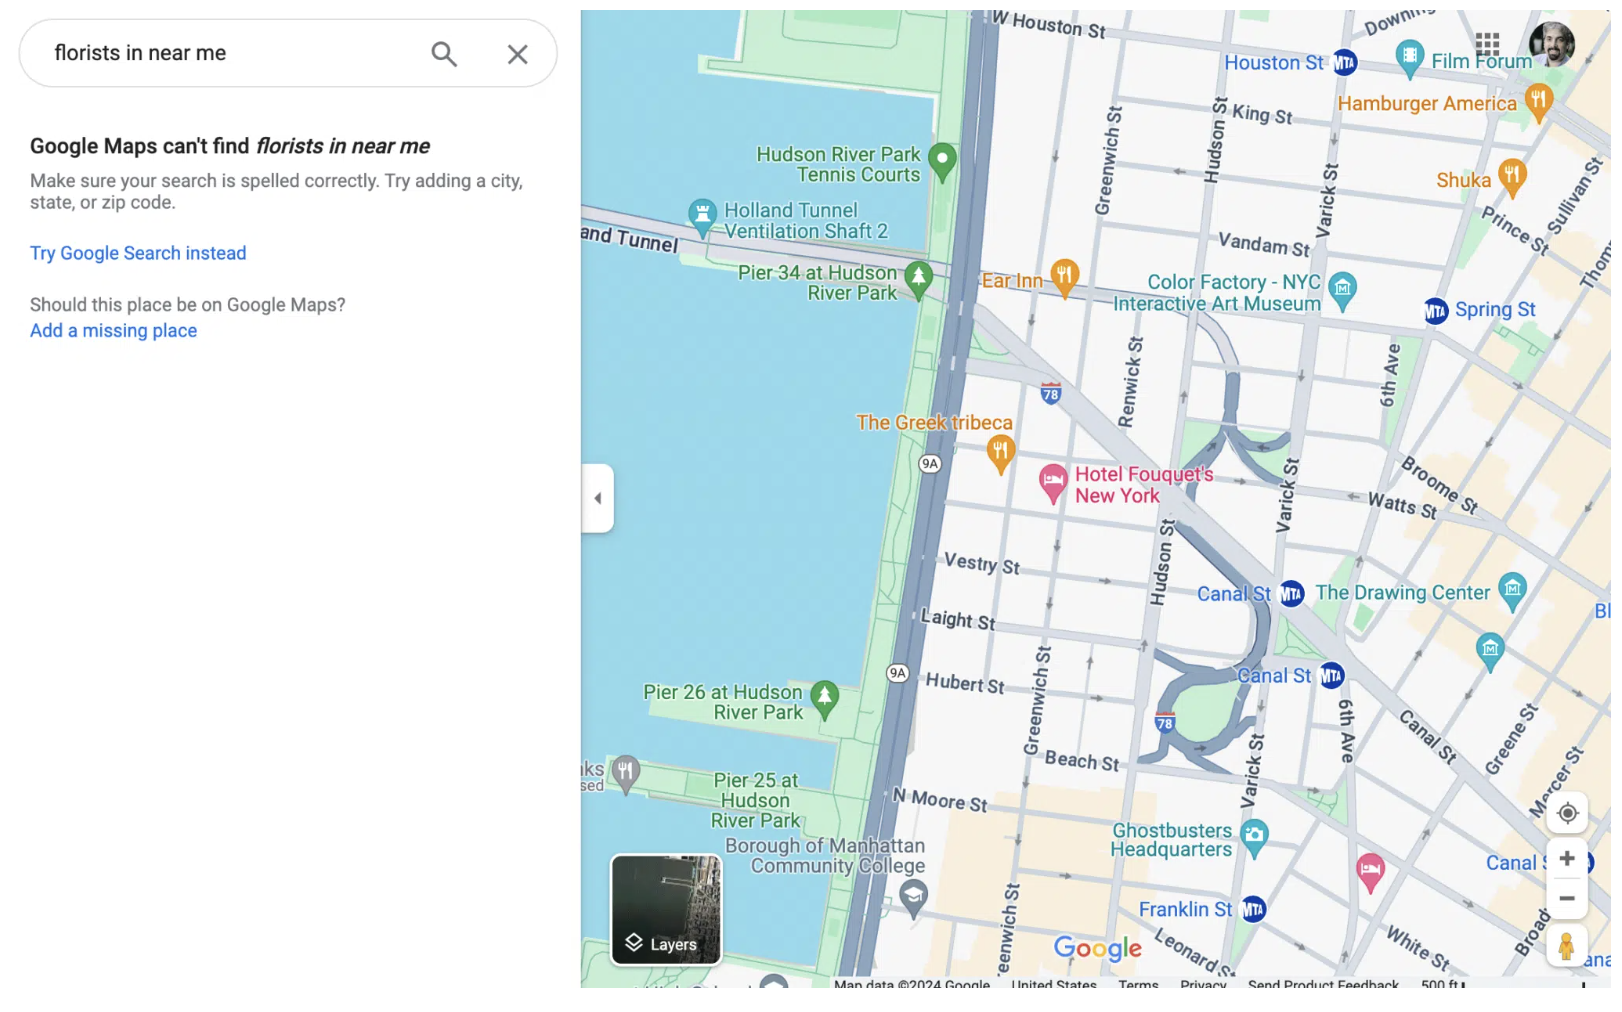 An example of no results in Google Maps for a florist search